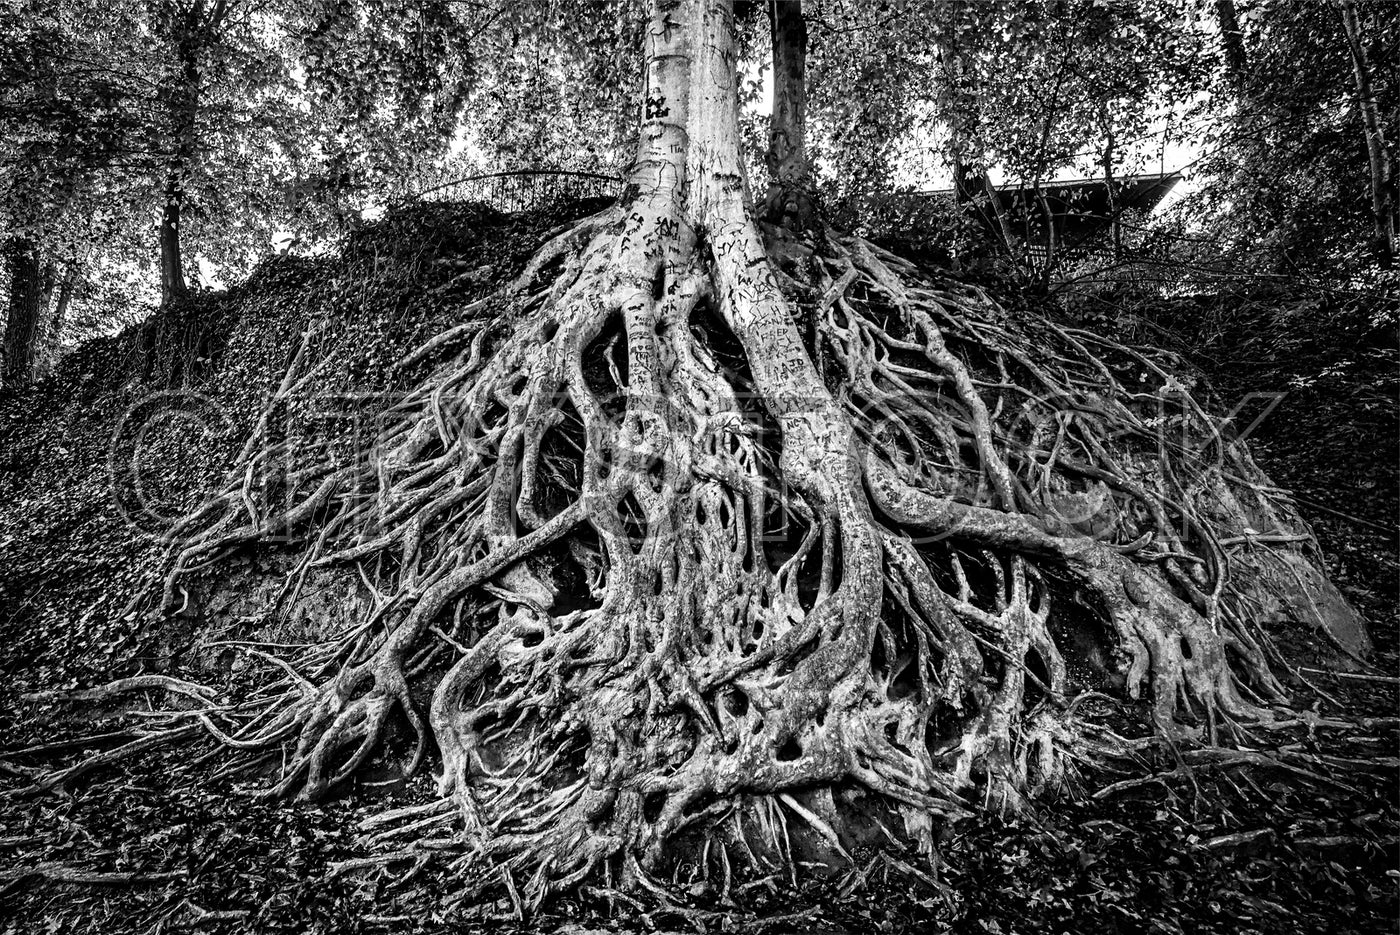 Vast network of intertwined tree roots in Greenville, SC in black and white